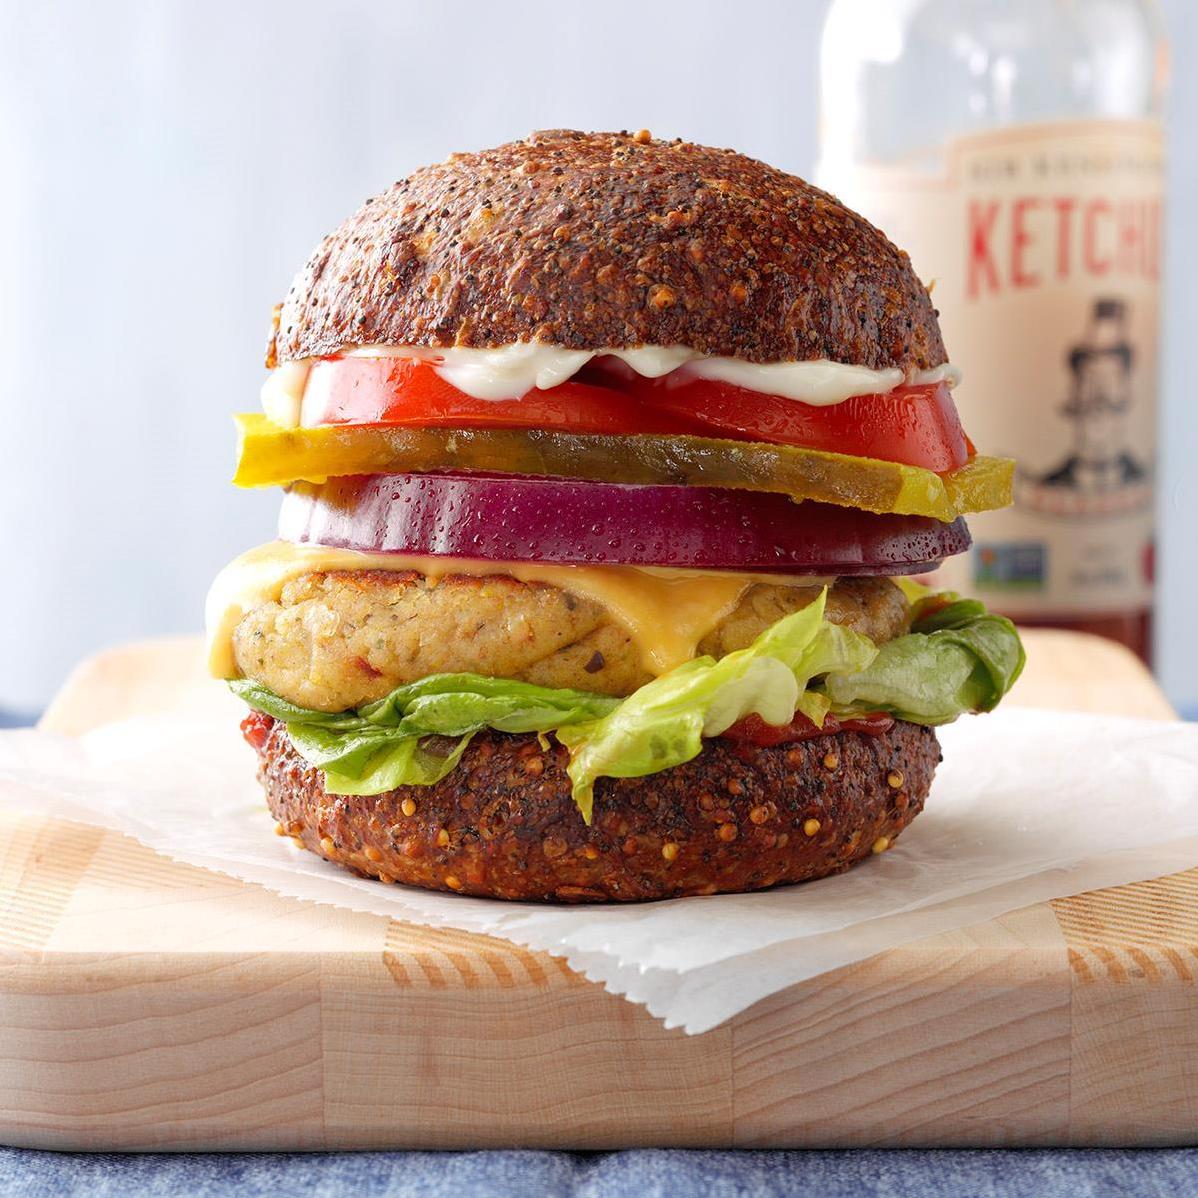  These burgers are quick to make and perfect for any time of day.